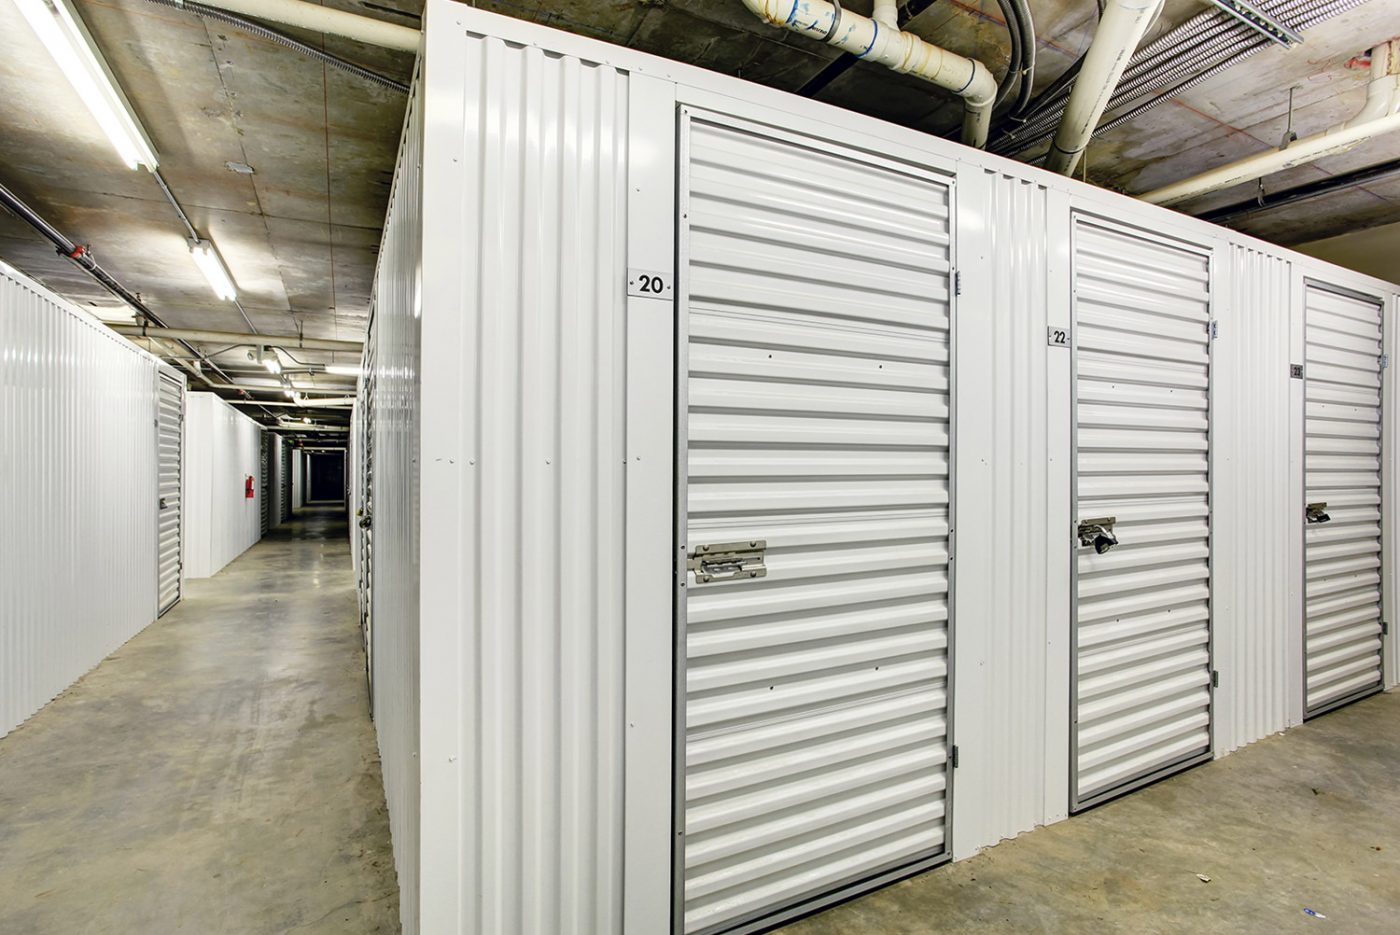 Personal Storage in New York, New Jersey, Miami, Los Angeles